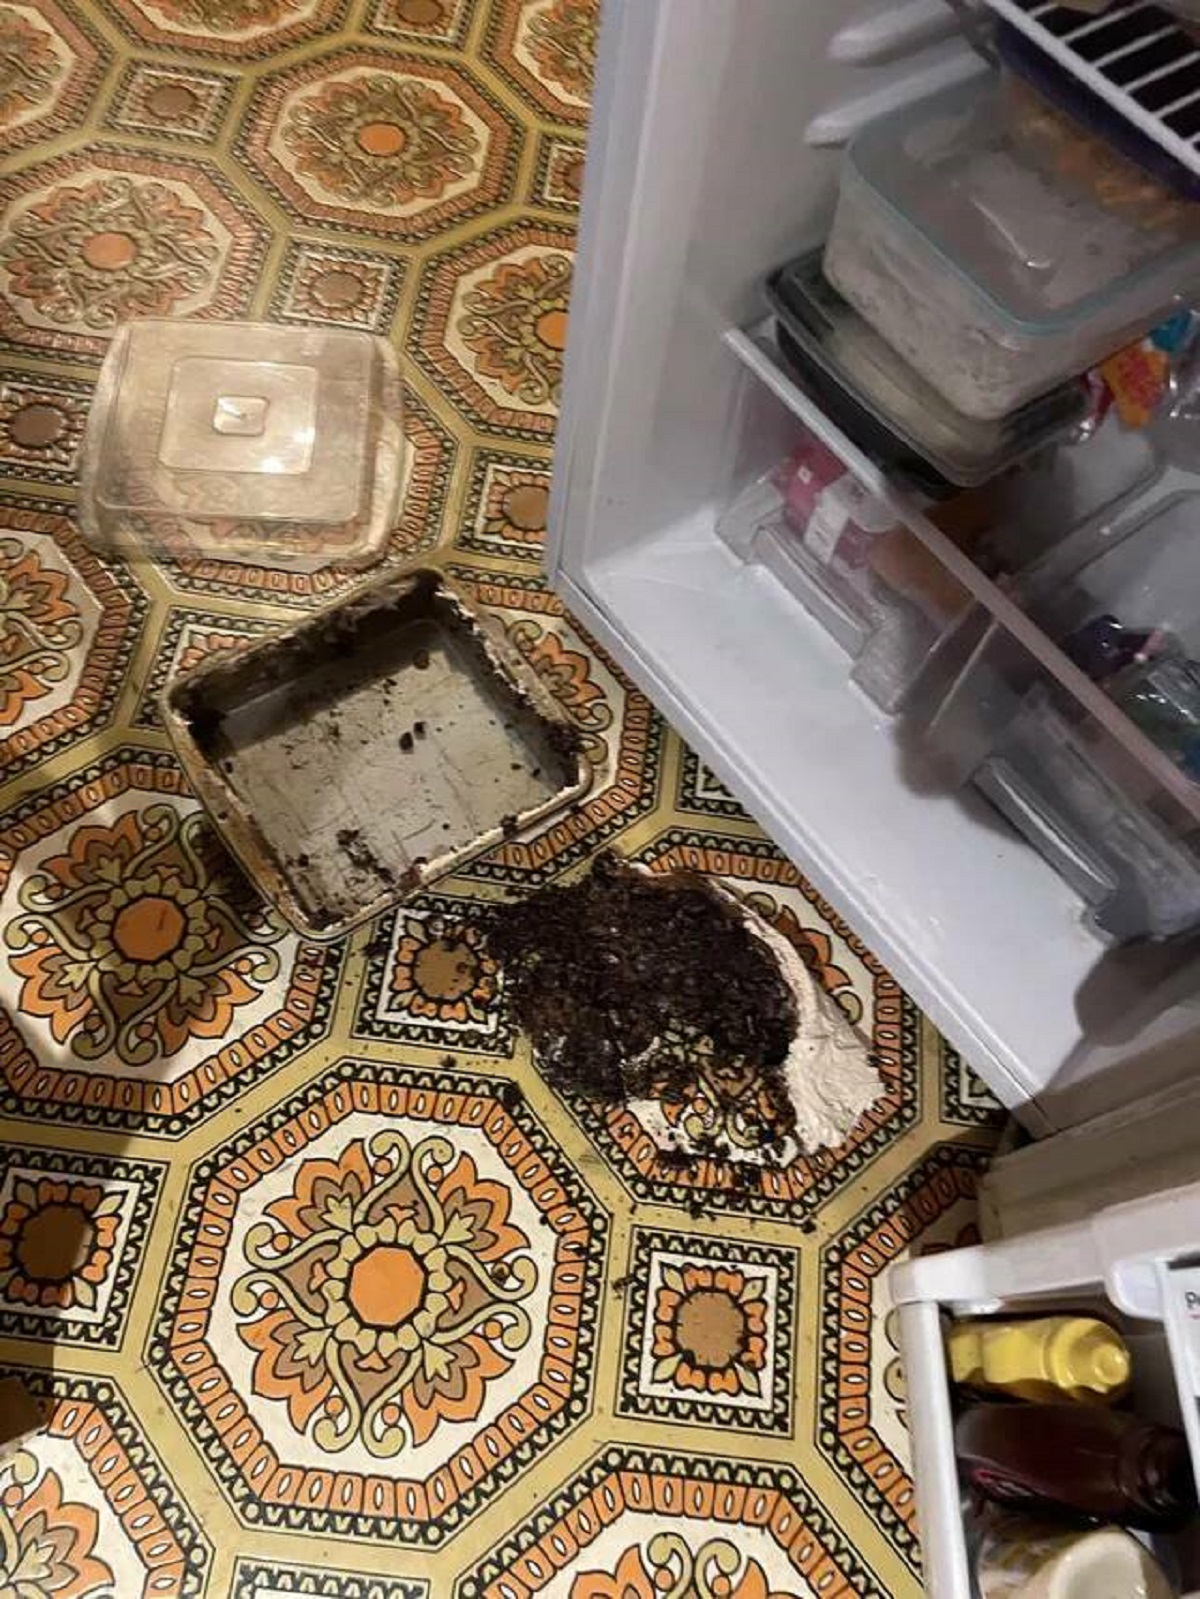 "Had myself a “Kevin’s chili” moment last night when I dumped my entire pan of dessert on the kitchen floor."